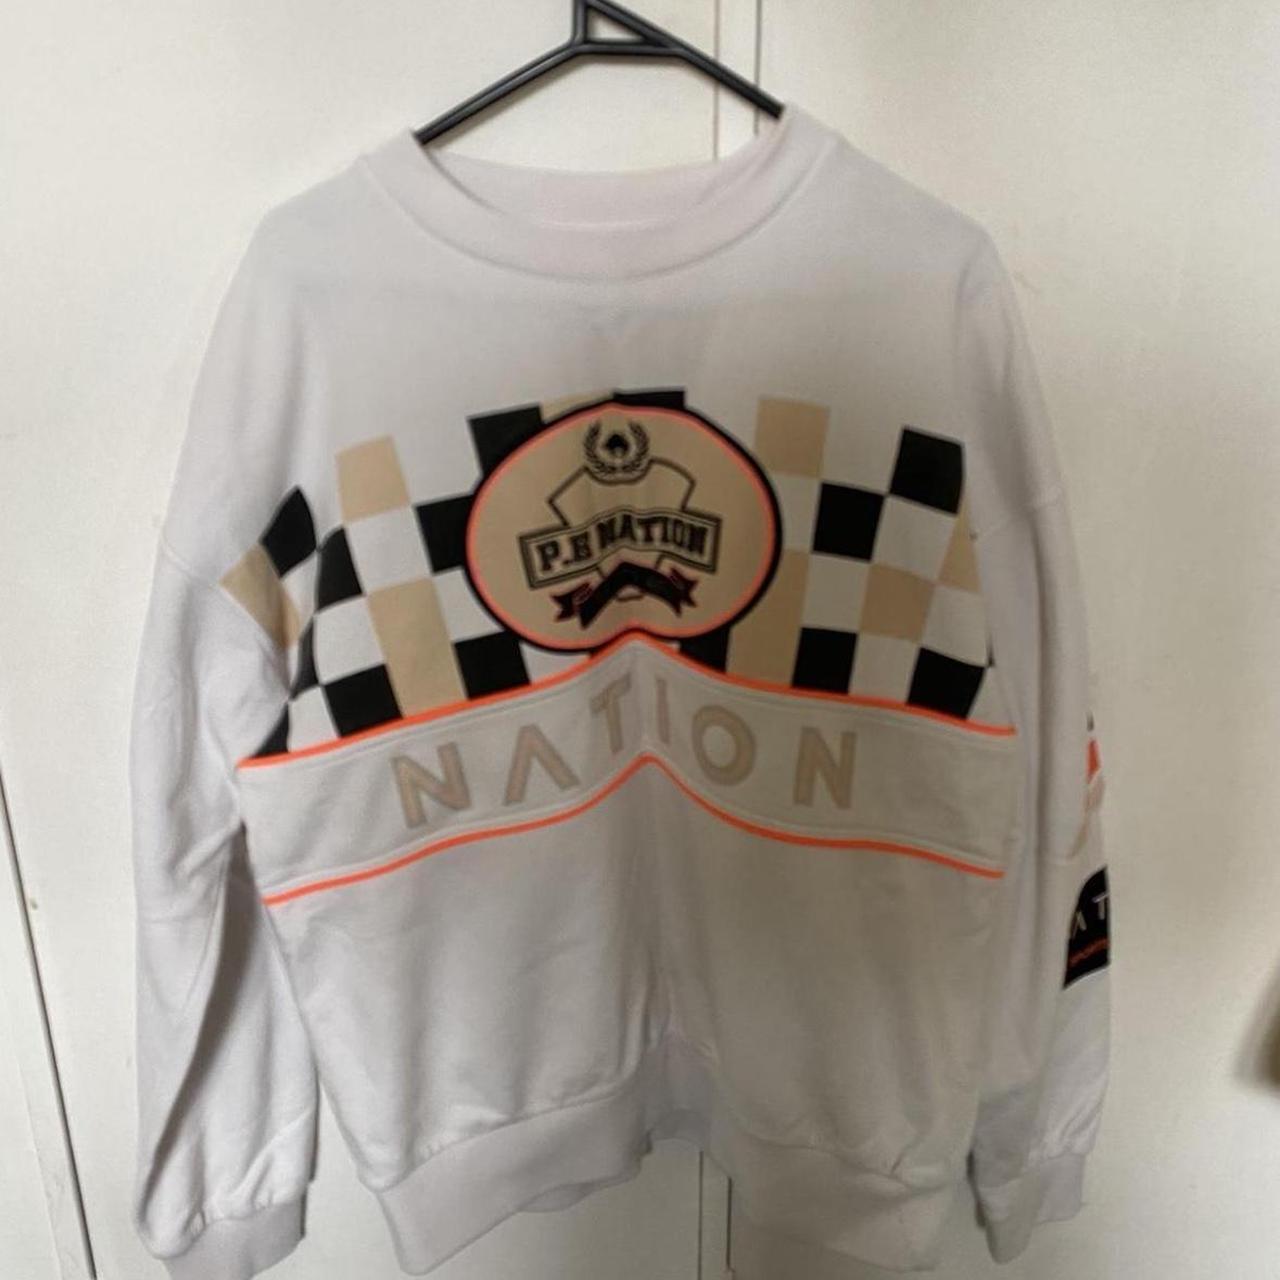 PE Nation jumper Couple of marks as seen on belly &... - Depop